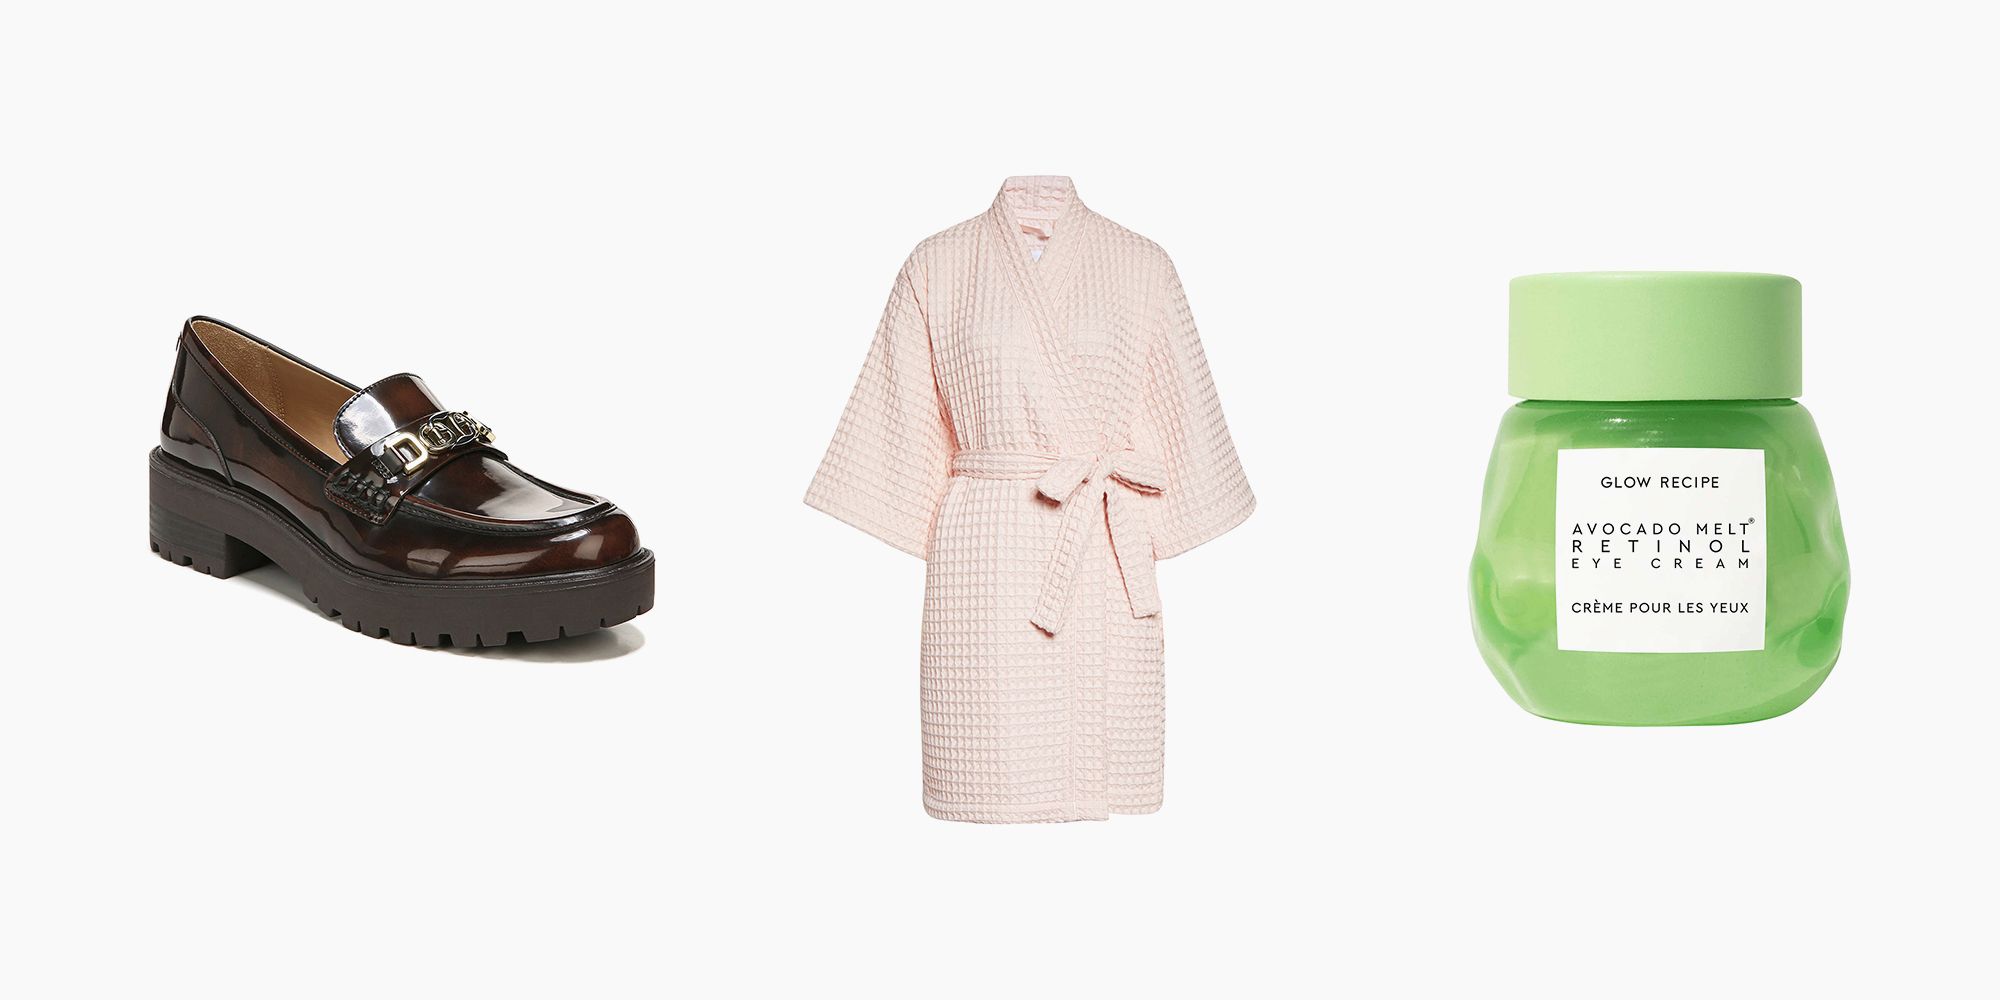 The 10 Things We’re Shopping From Google’s Holiday 100 List